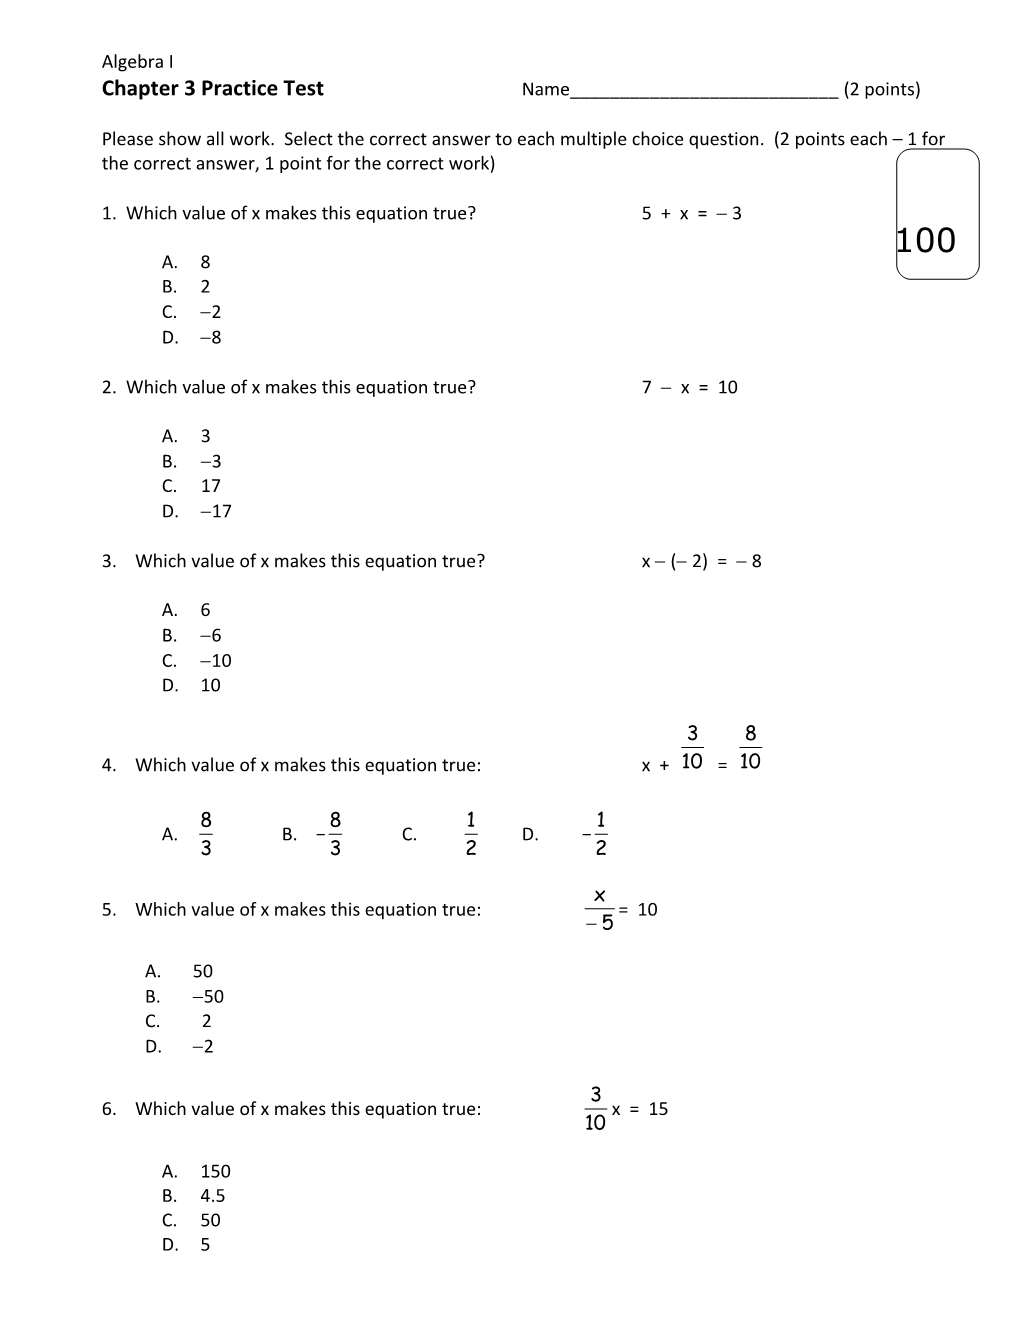 Chapter 3 Practice Test Name______(2 Points)